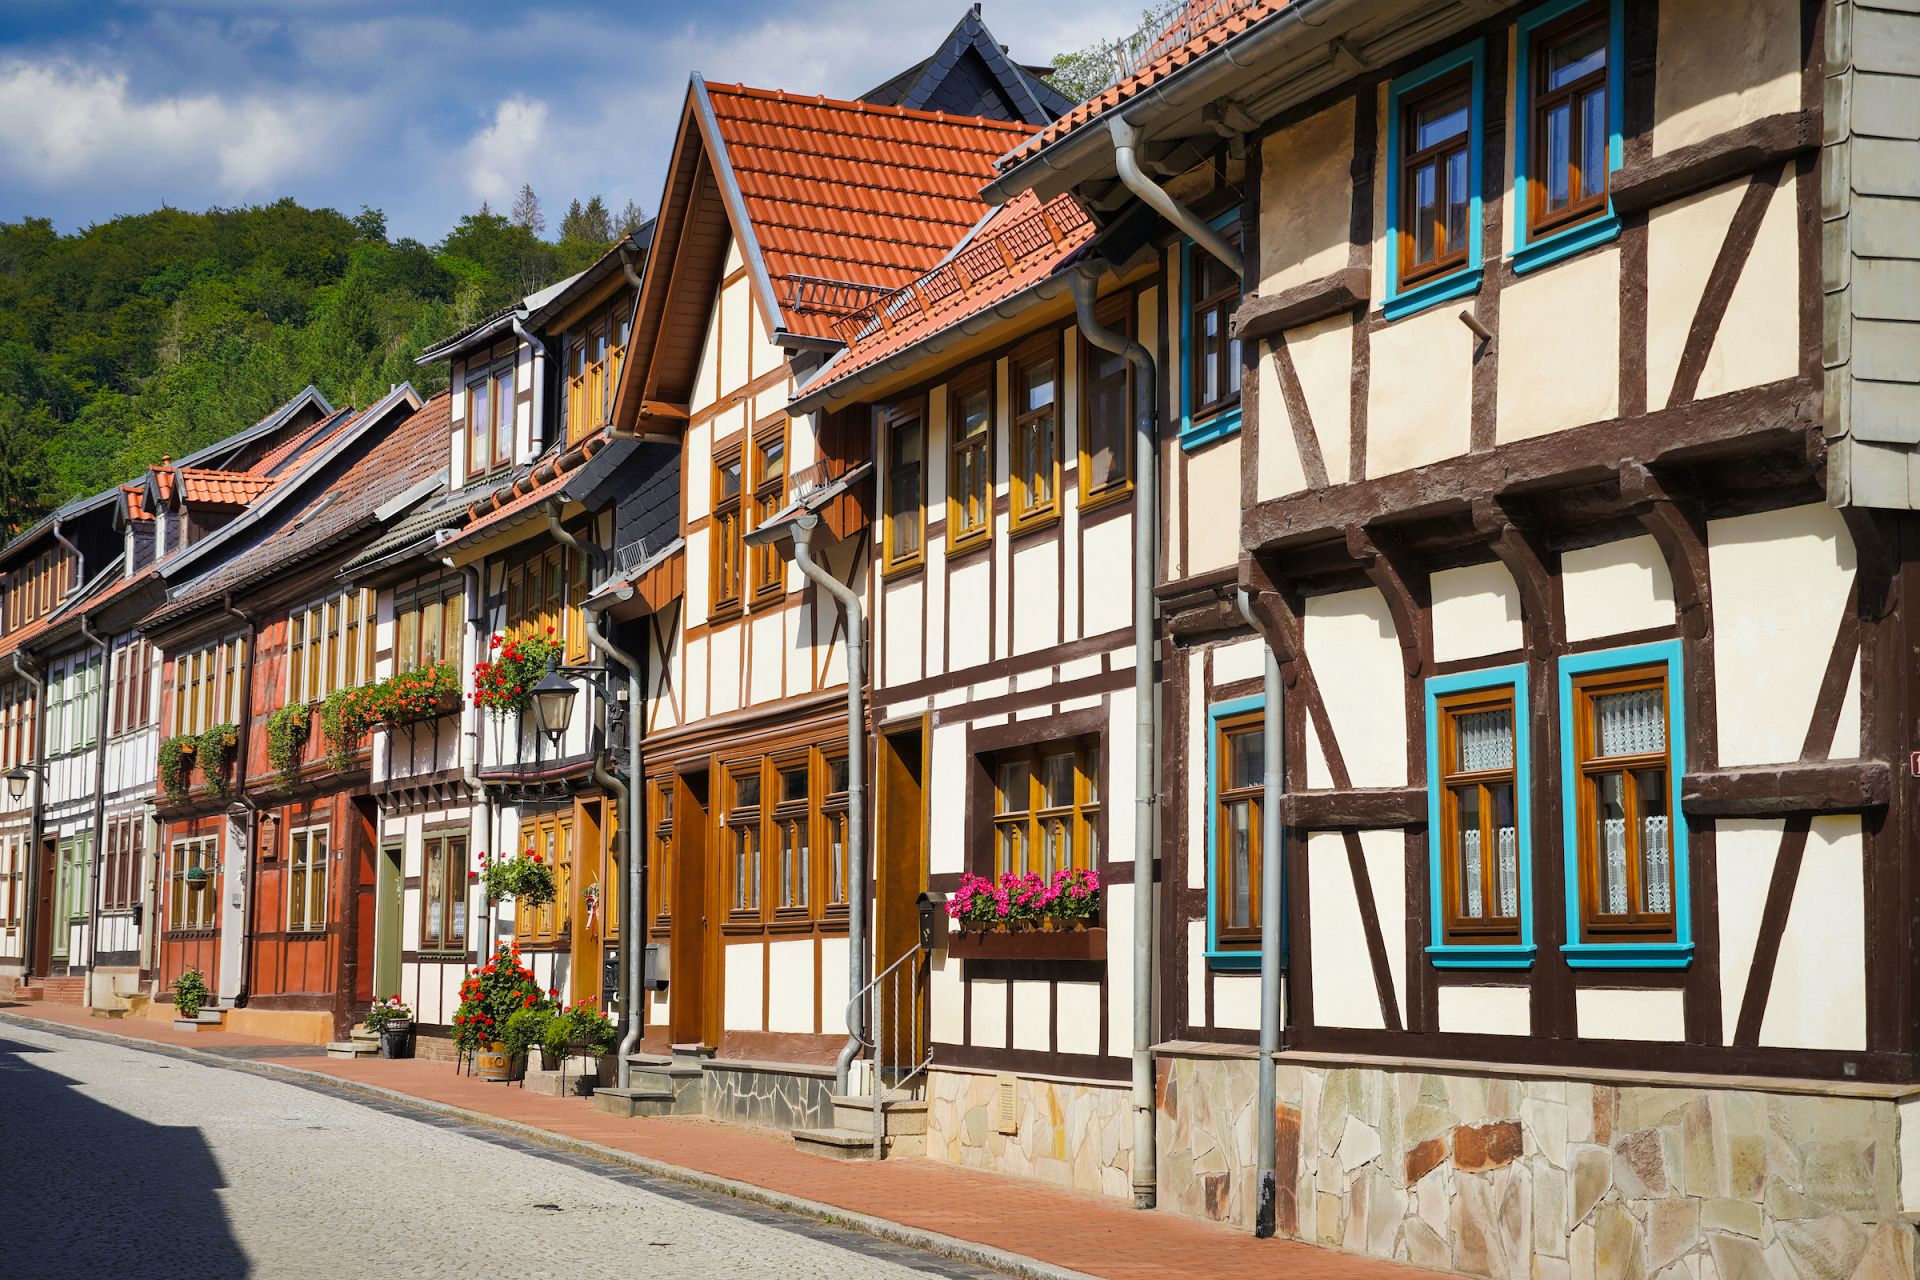 Half-timbered town of Stolberg (Harz)